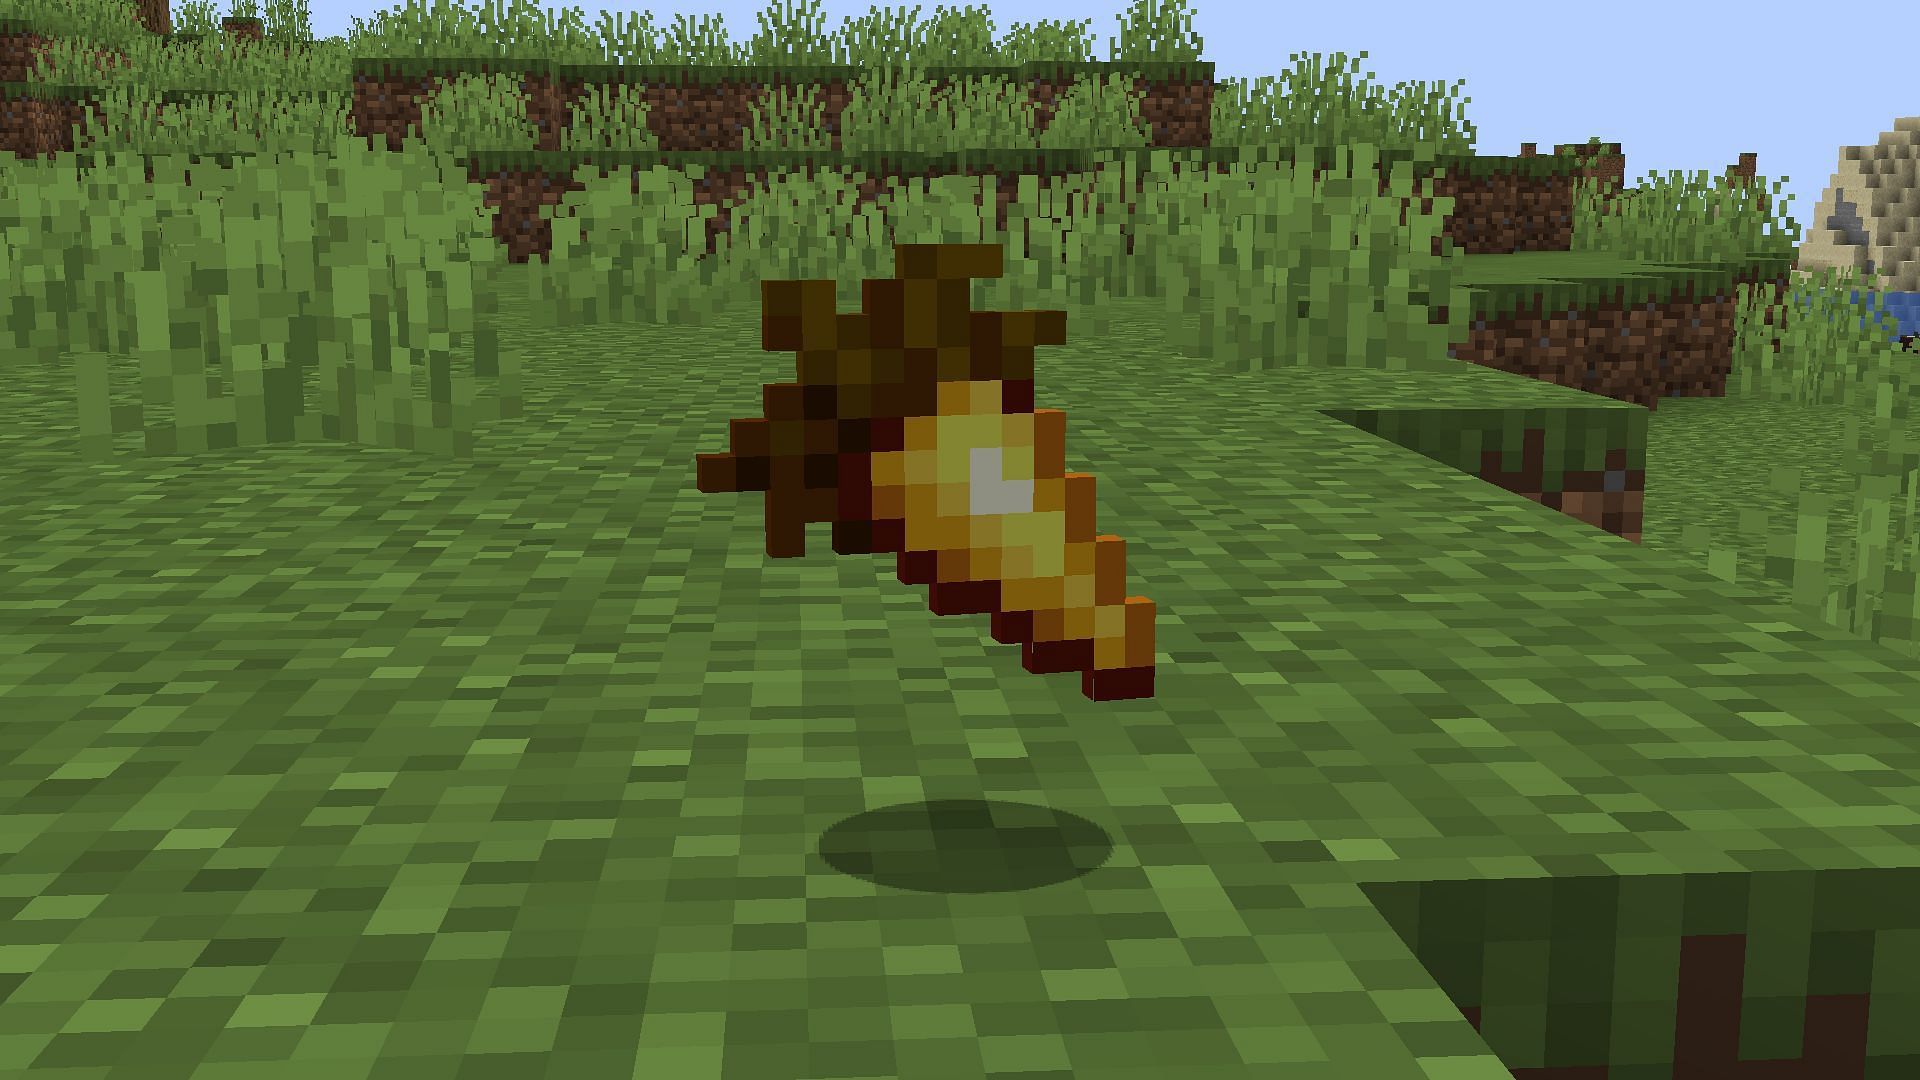 Golden carrot is the best food item to breed horses in Minecraft (Image via Mojang)